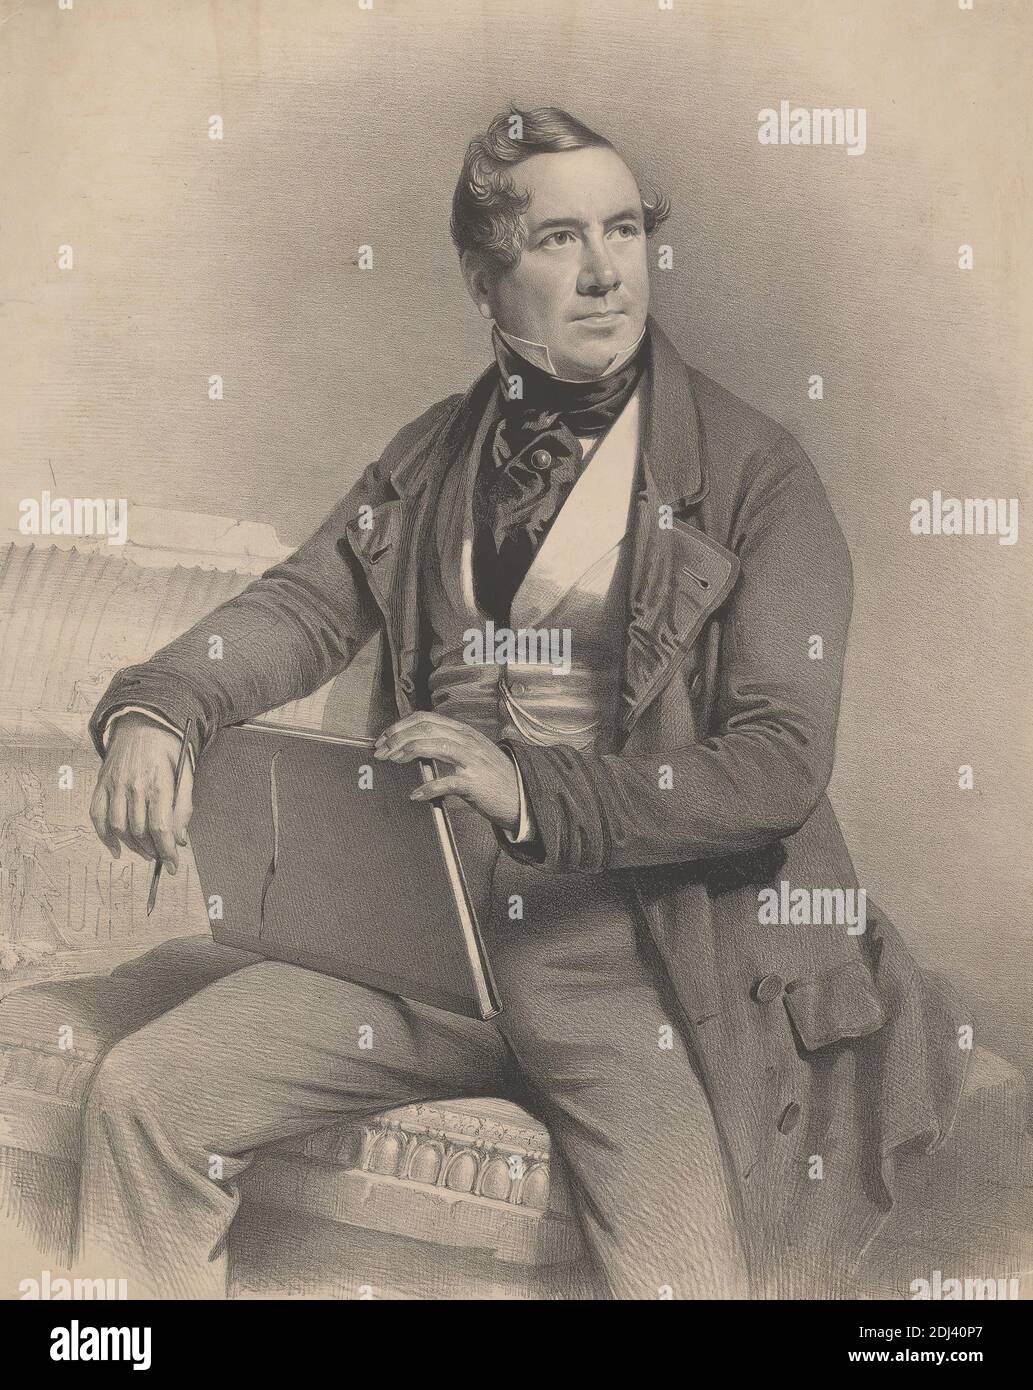 David Roberts, Print made by Charles Baugniet, 1814–1886, Belgian, 1844, Lithograph on thick, smooth, beige card with gray chine collé, Sheet: 15 3/8 x 12 3/16 inches (39.1 x 30.9 cm), artist, book, collar, cravat, frock coat, frontispiece (illustration), hieroglyphics, man, pencil, portrait, ruins, sarcophagus, sketchbook, The Holy Land, Syria, Idumea, Arabia, Egypt and Nubia, 1842-49, trousers, waistcoat Stock Photo